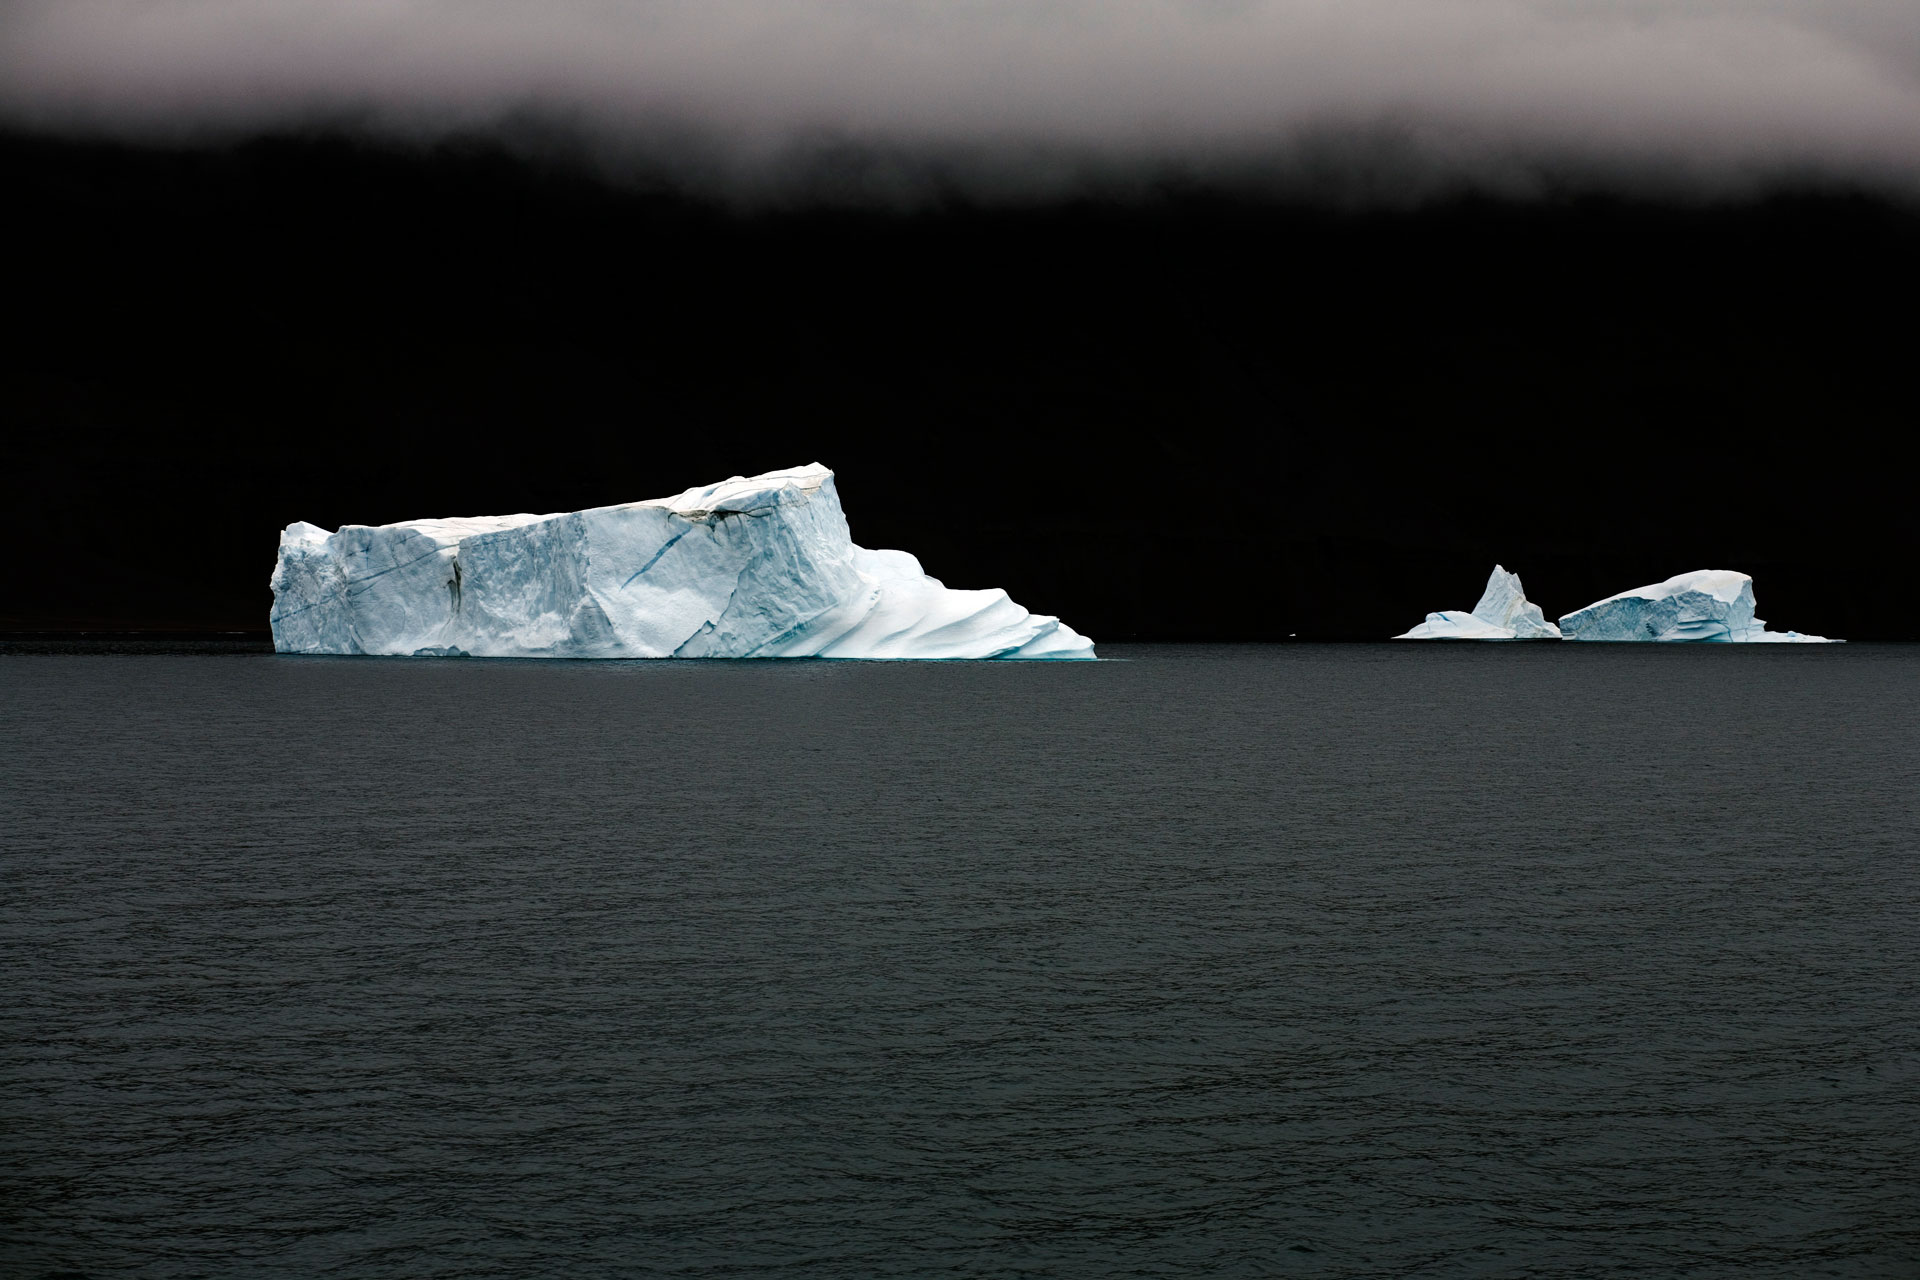 Icebergs Floating By – East Greenland / The Last Iceberg Series III; By Camille Seaman